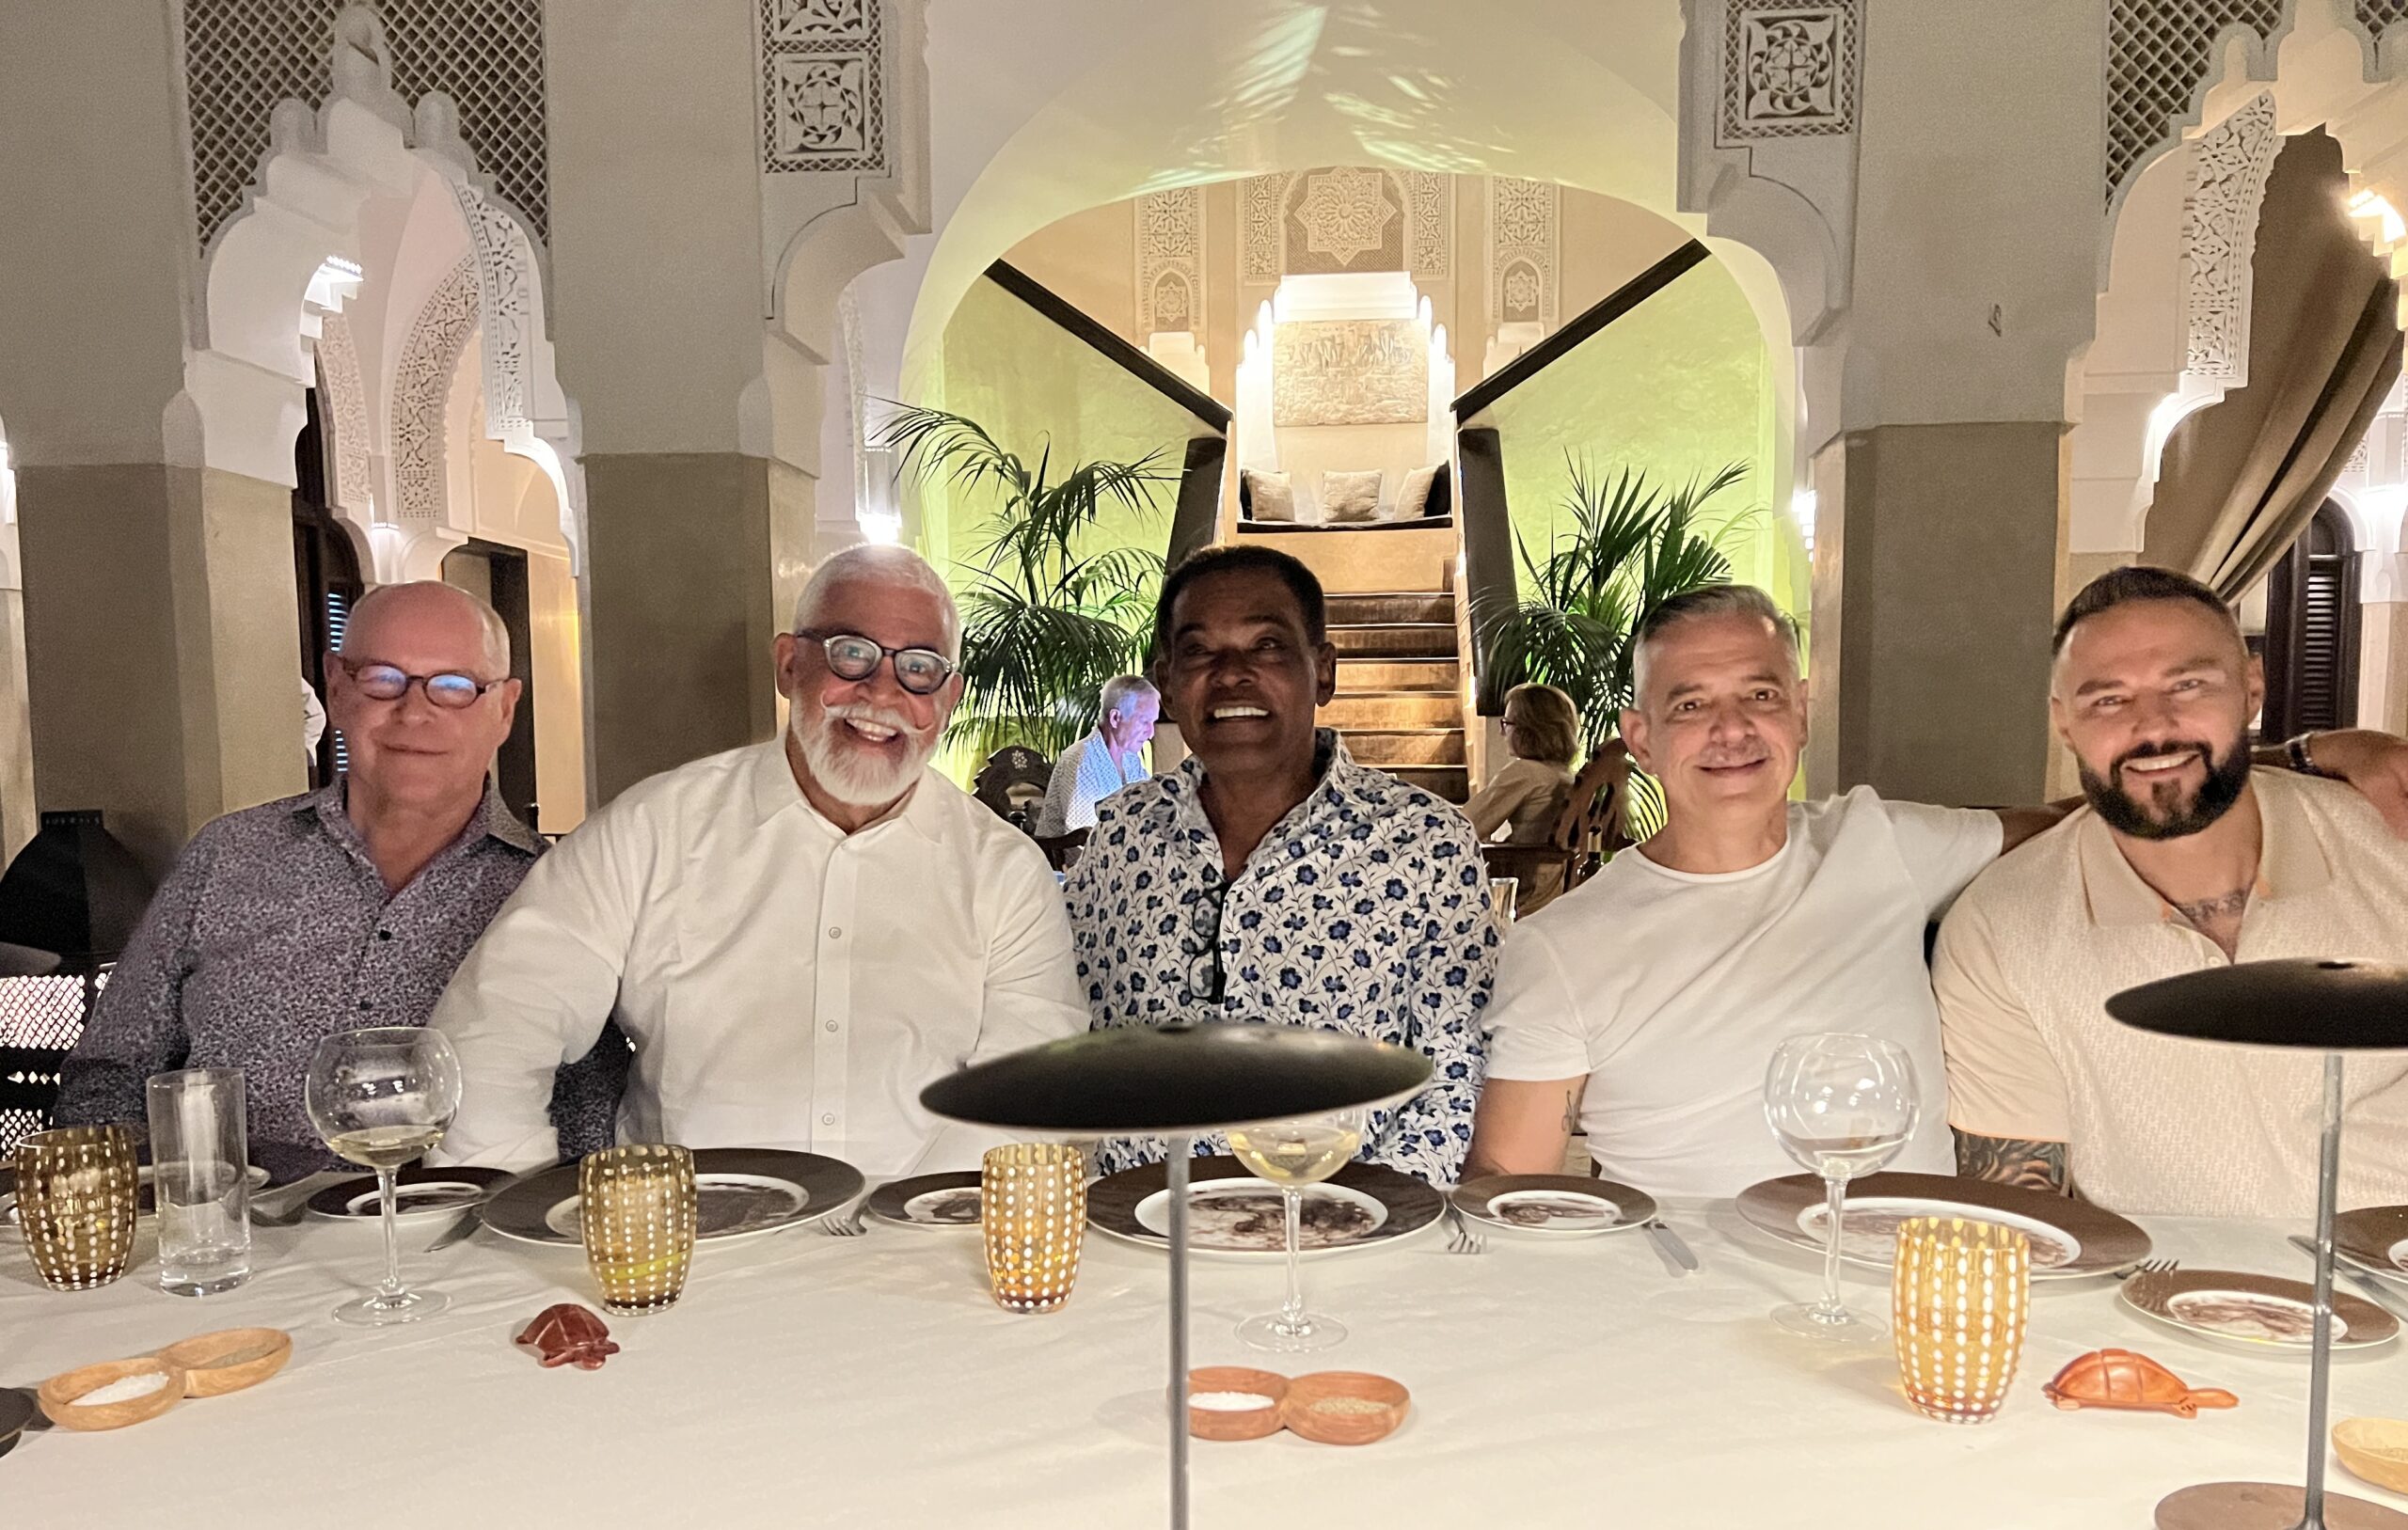 The dining experience in Morocco for Source Travelers